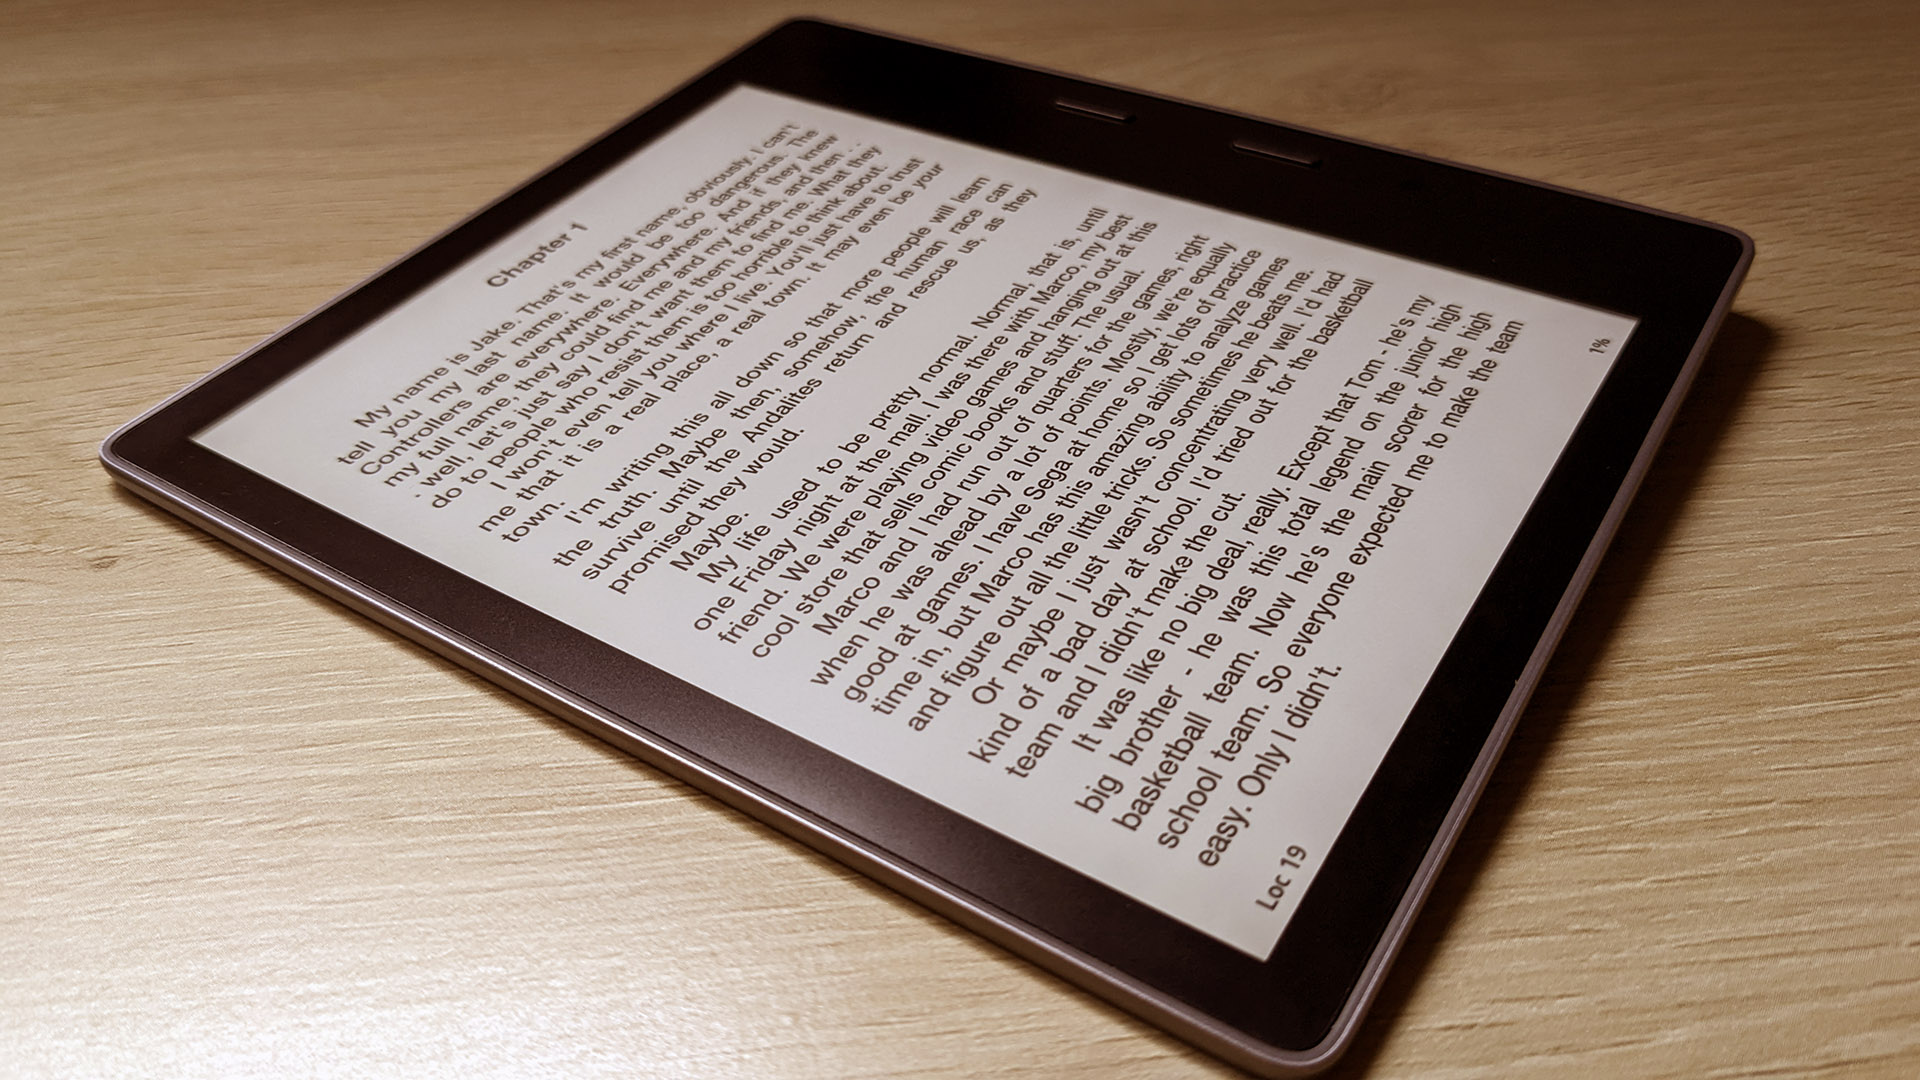 Your Kindle can at closing read ePub books